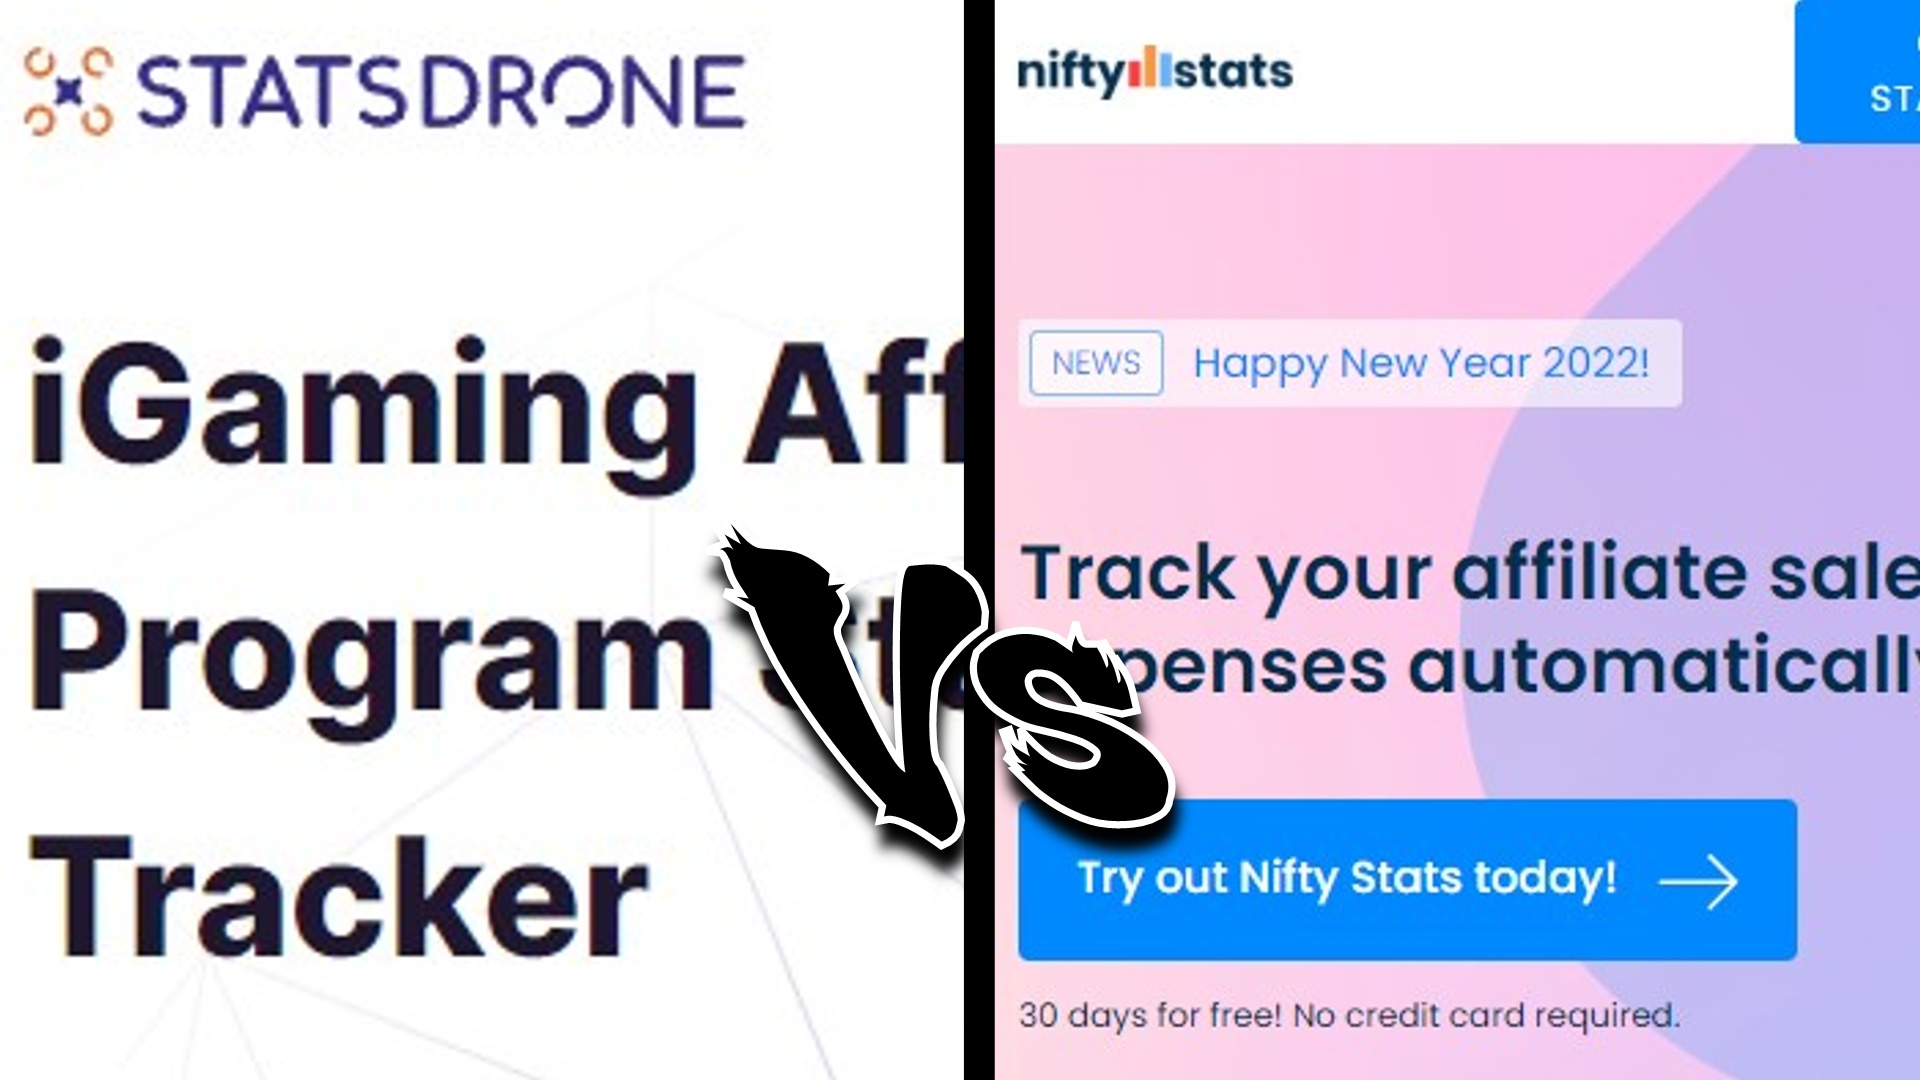 StatsDrone Vs Nifty Stats in 2022 - Features, Prices and Differences